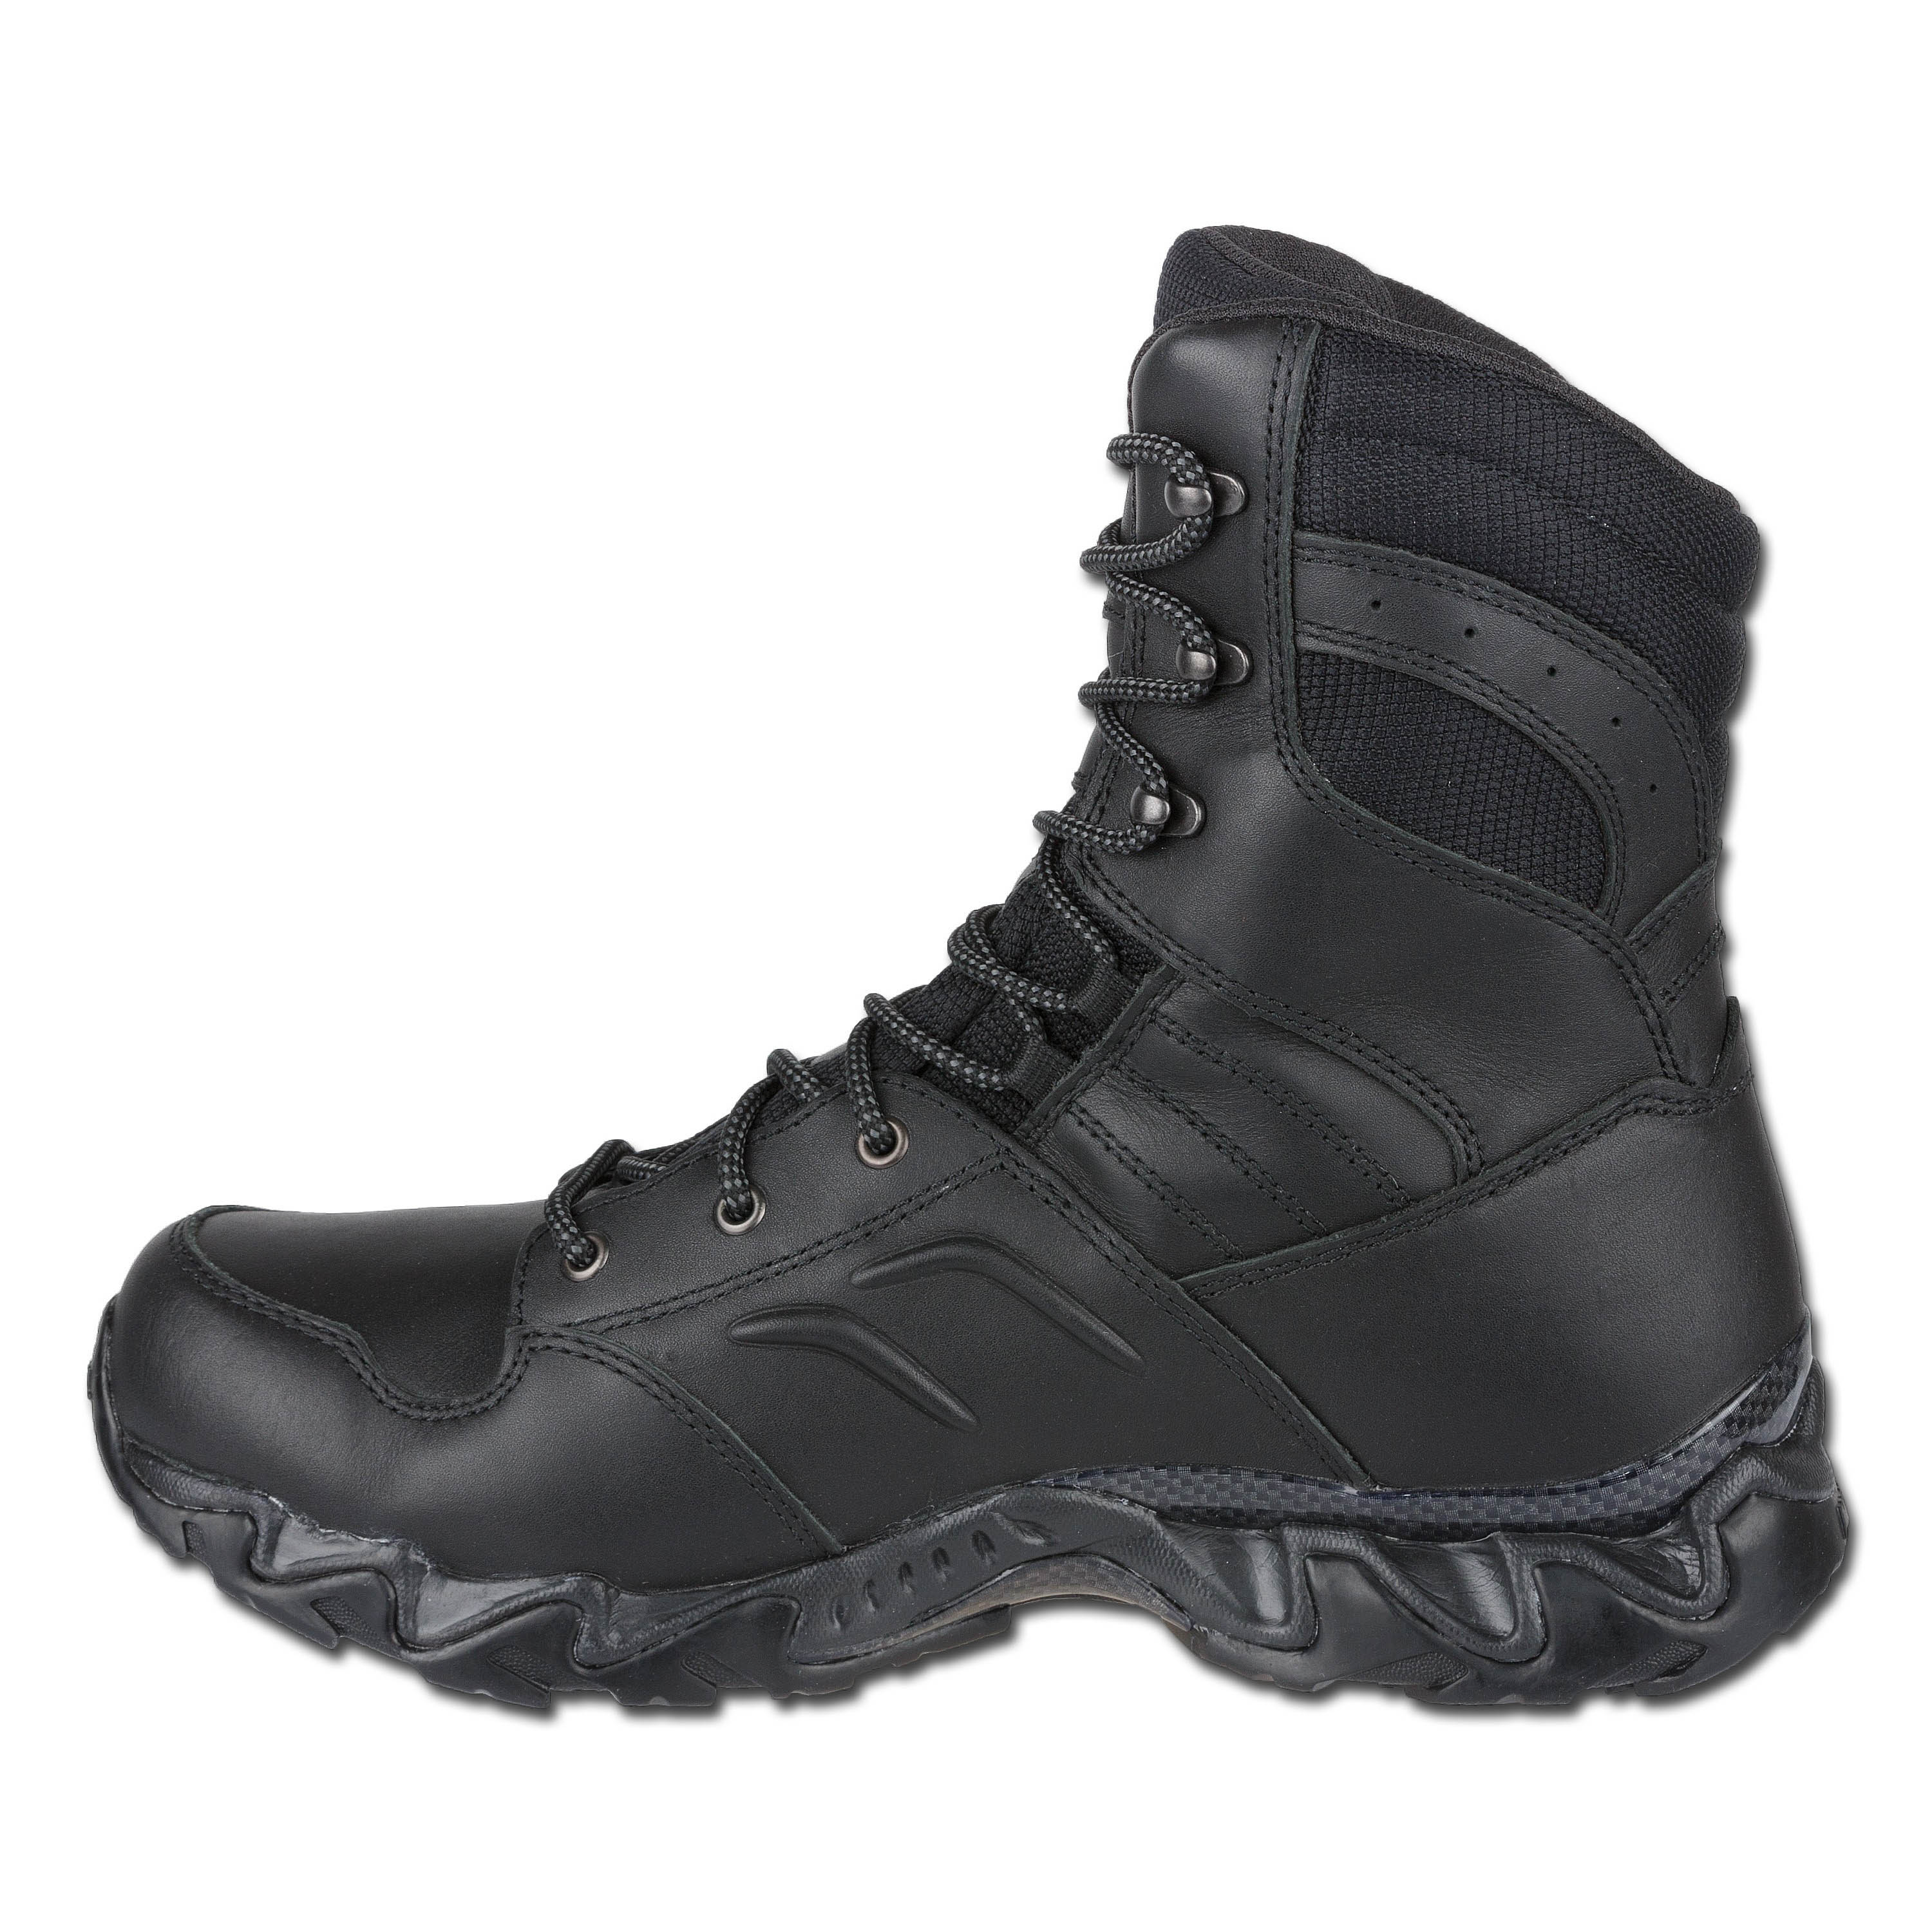 Purchase the Meindl Boots Black Cobra GTX by ASMC